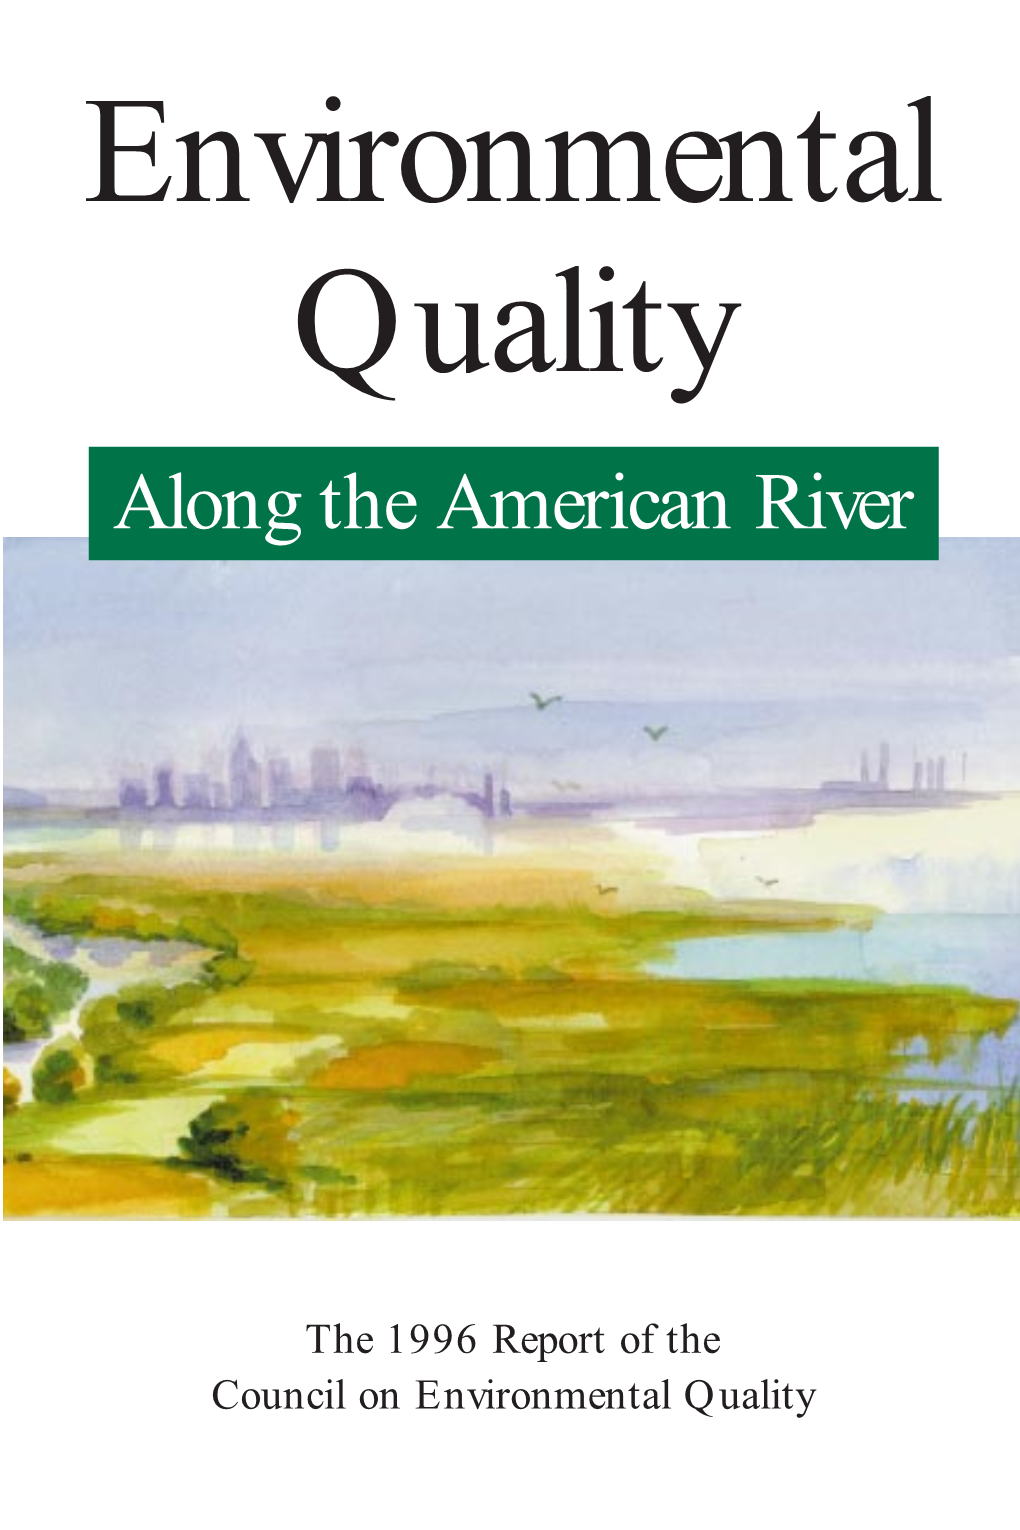 The 1996 Report of the Council on Environmental Quality Title of Chapter